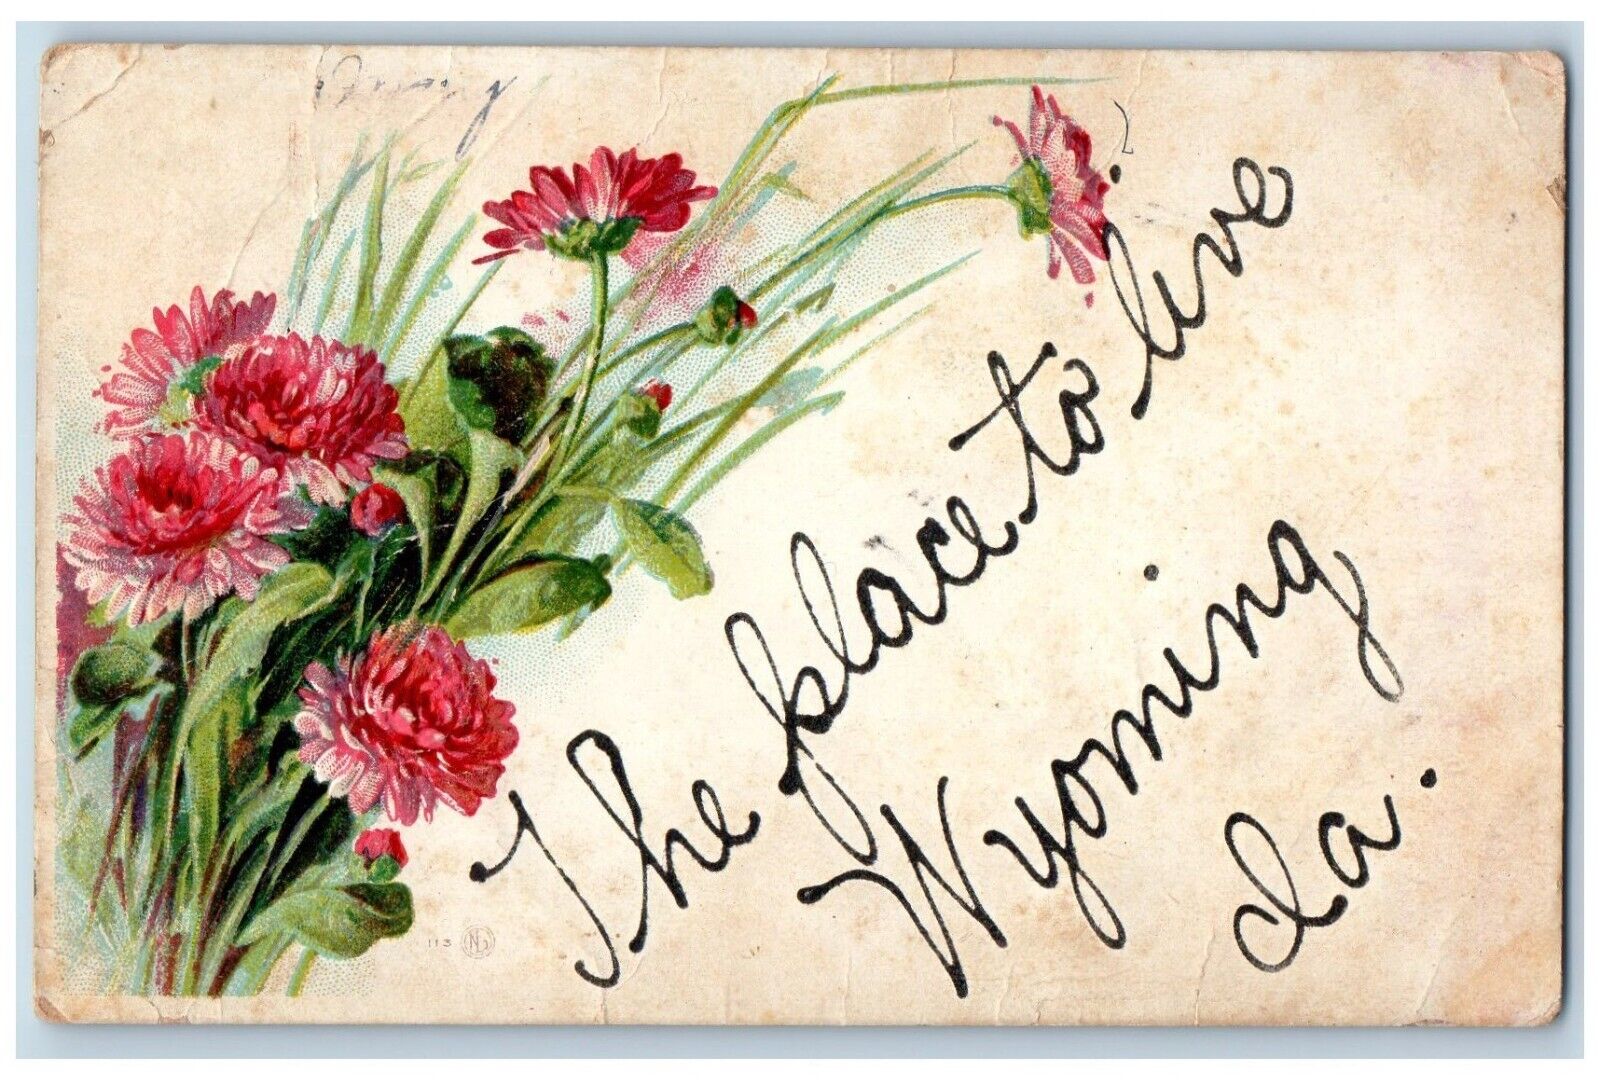 Monmouth Iowa IA Postcard Embossed Glitter Flower c1910 Vintage Antique Posted